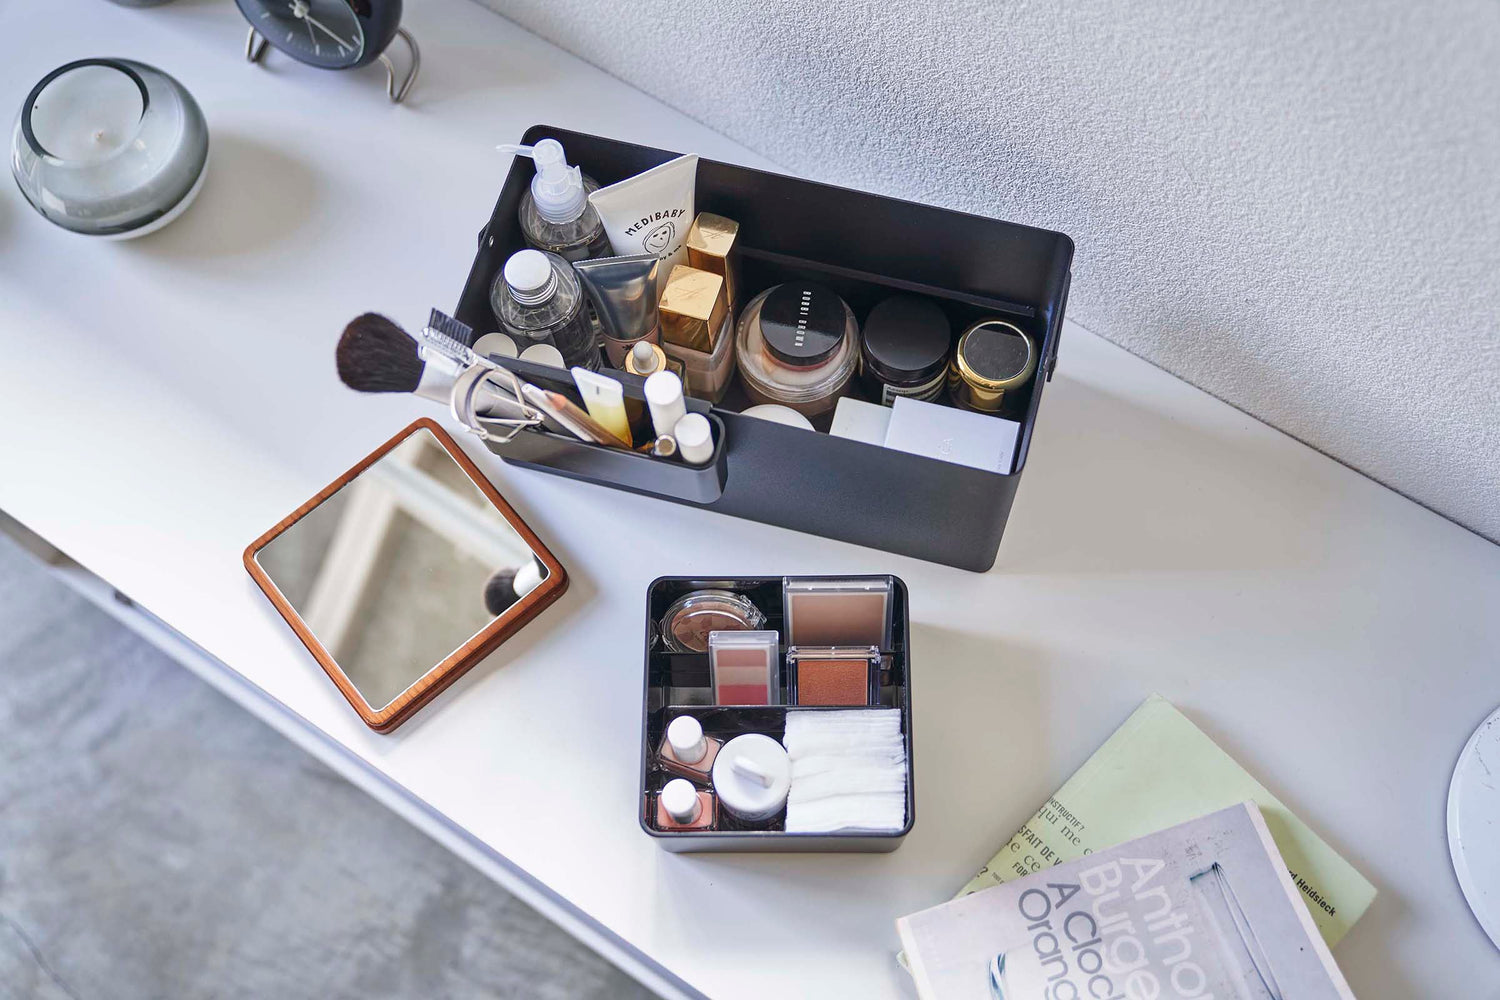 View 12 - Aerial view of open black Makeup Organizer holding makeup products by Yamazaki Home.